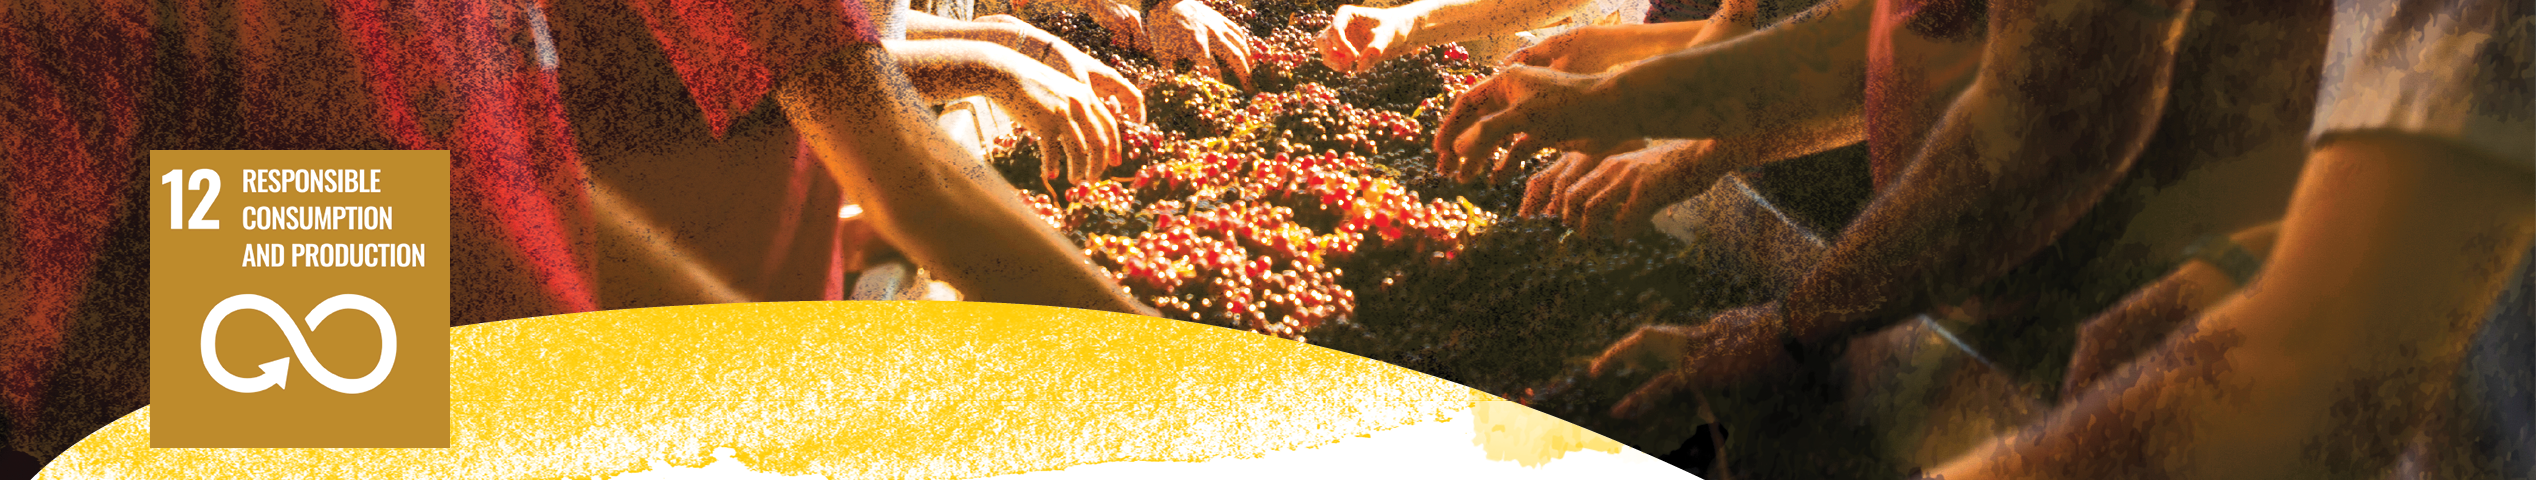 SDG 12 icon for responsible consumption with image of people processing grapes